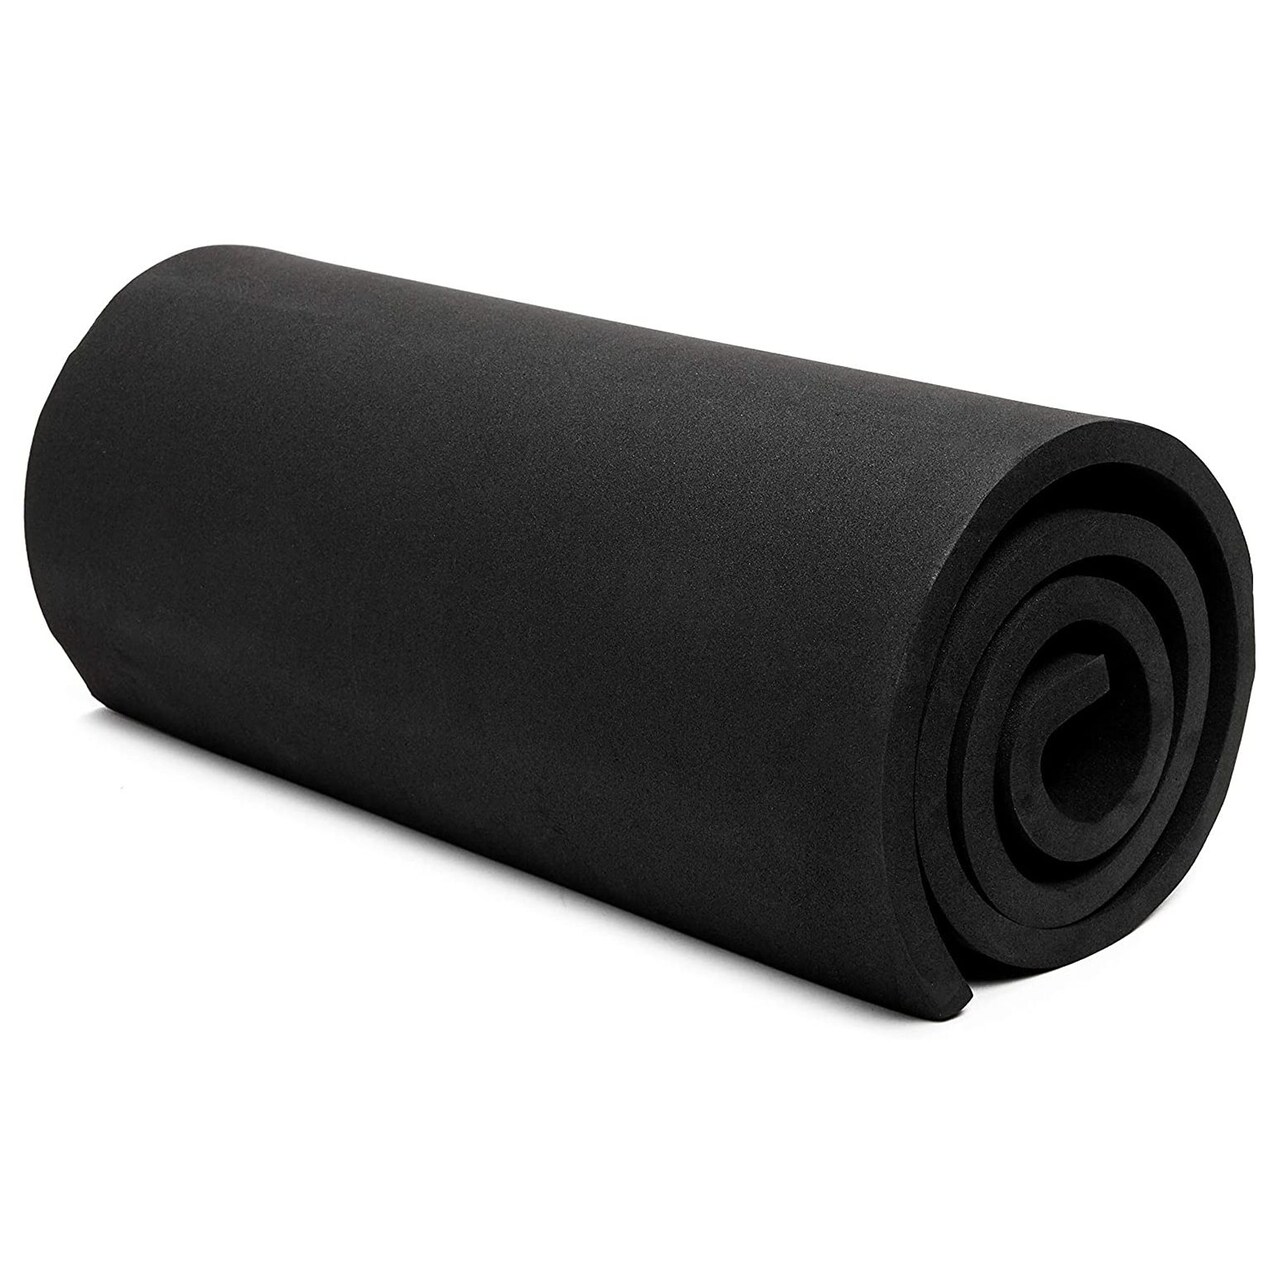 Black High Density Cosplay EVA Foam, 10mm Sheet for Costumes, Arts and  Crafts Projects (14 x 39 In)